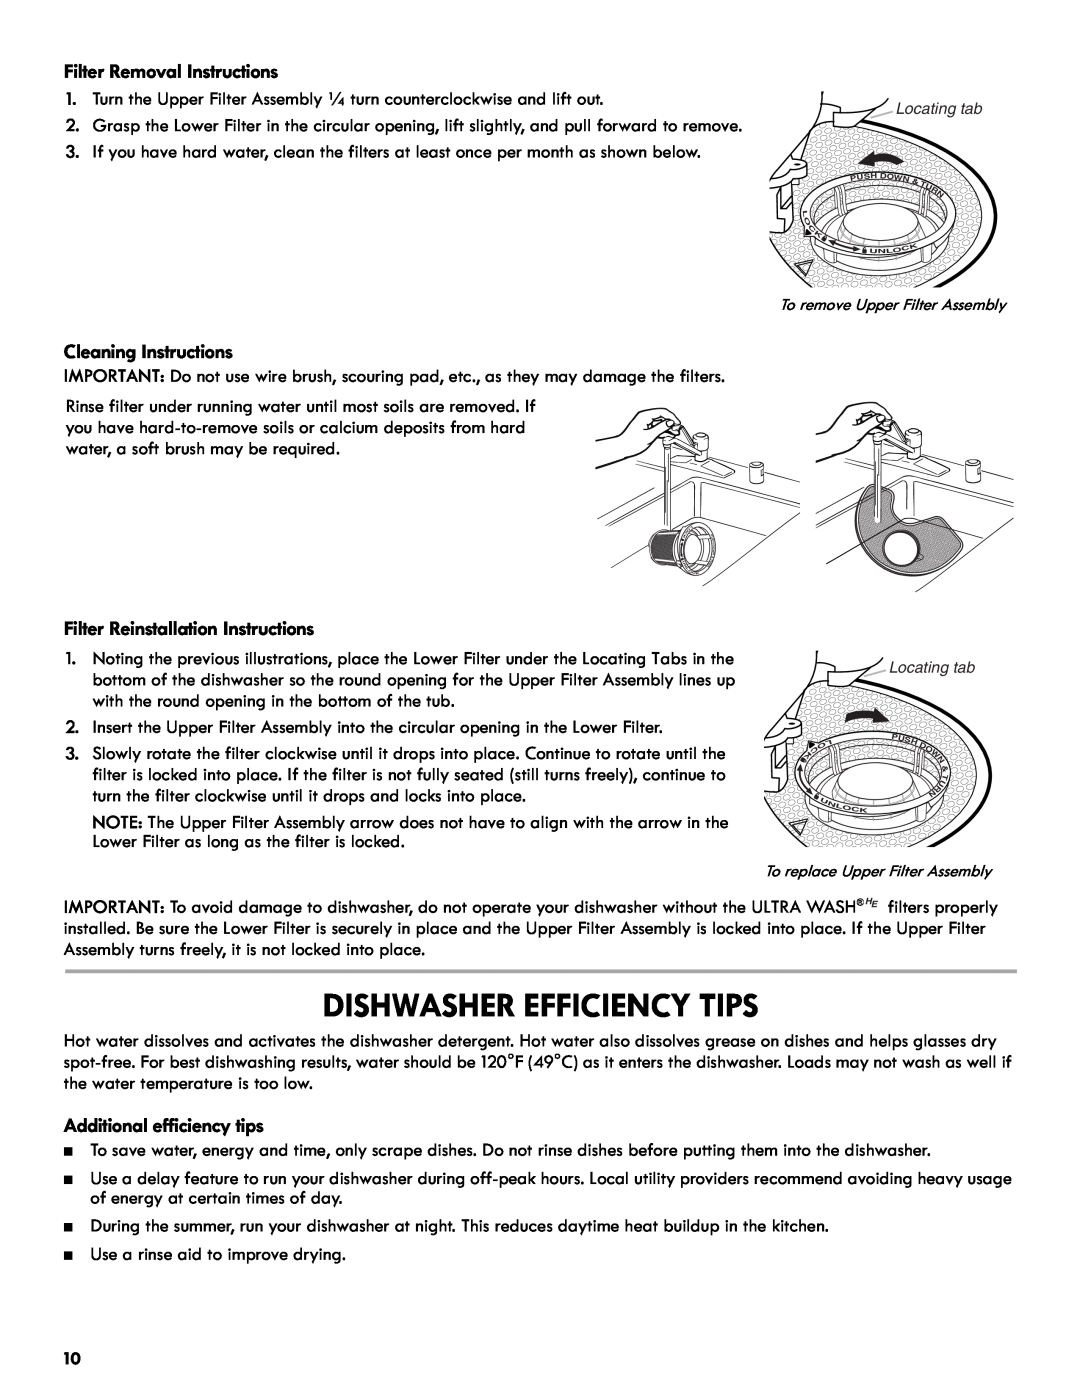 Kenmore 665.1327 manual Dishwasher Efficiency Tips, Filter Removal Instructions, Cleaning Instructions 